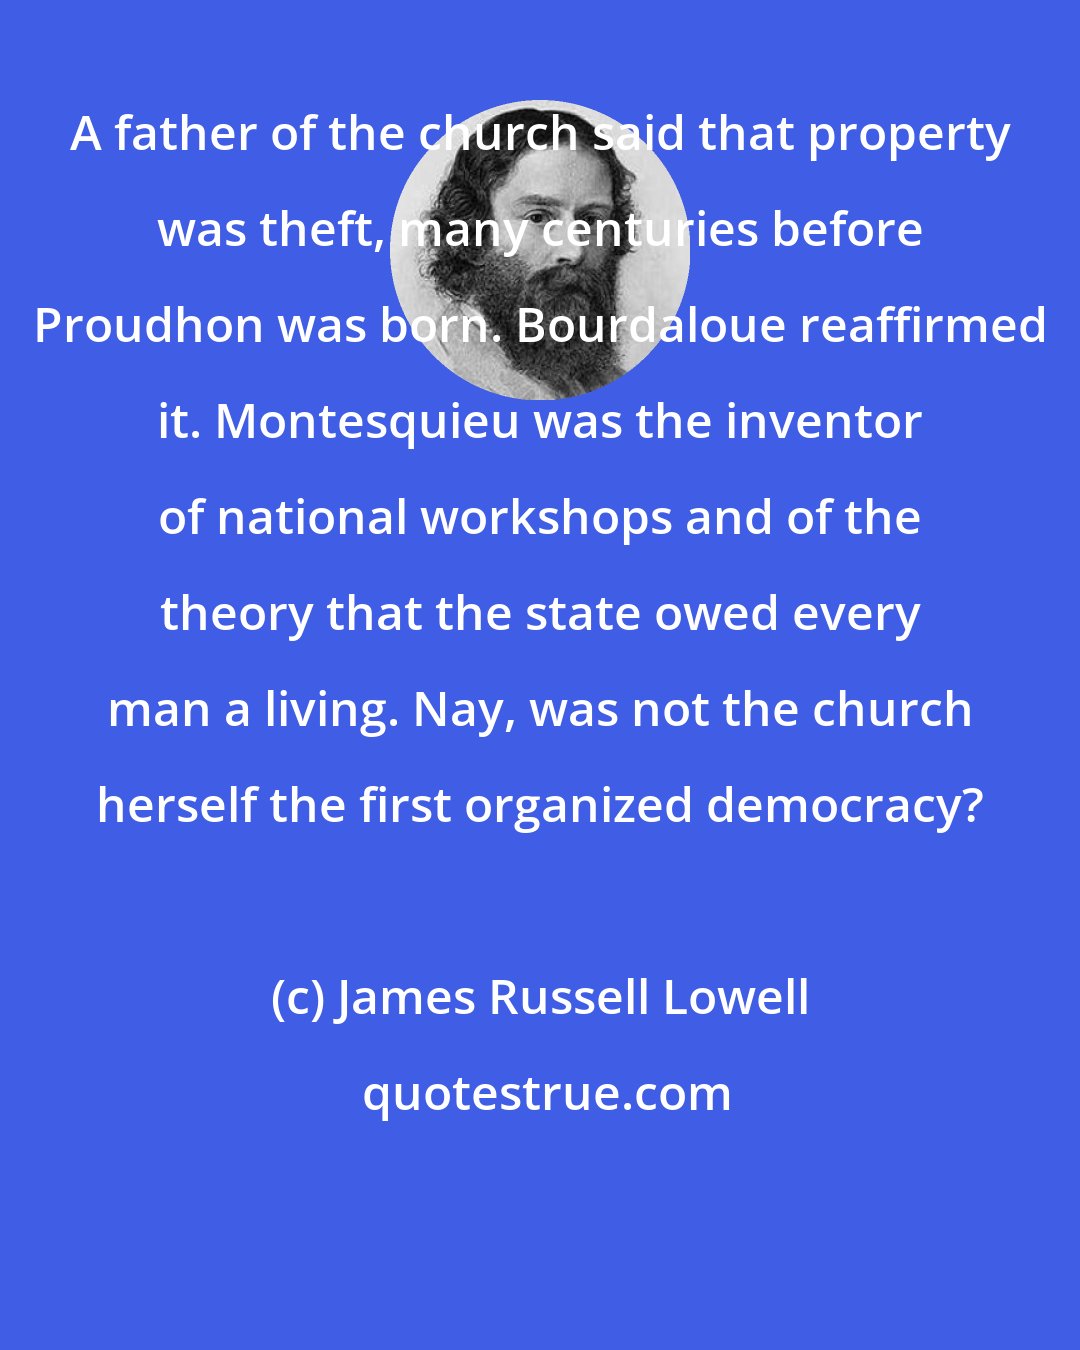 James Russell Lowell: A father of the church said that property was theft, many centuries before Proudhon was born. Bourdaloue reaffirmed it. Montesquieu was the inventor of national workshops and of the theory that the state owed every man a living. Nay, was not the church herself the first organized democracy?